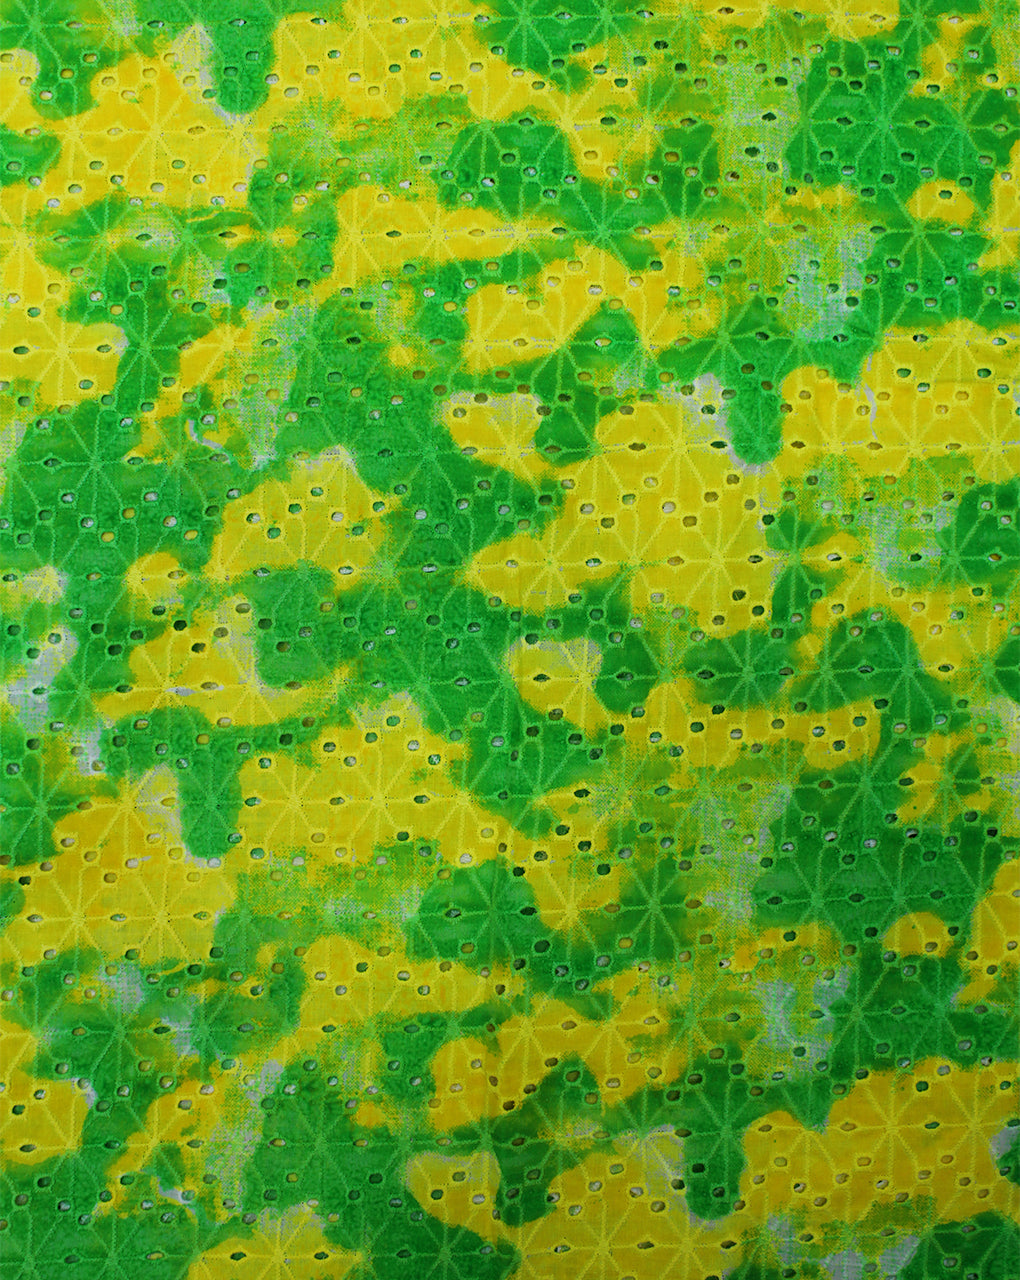 GREEN AND YELLOW COTTON PRINTED SCHIFFLI EMBROIDERY FABRIC